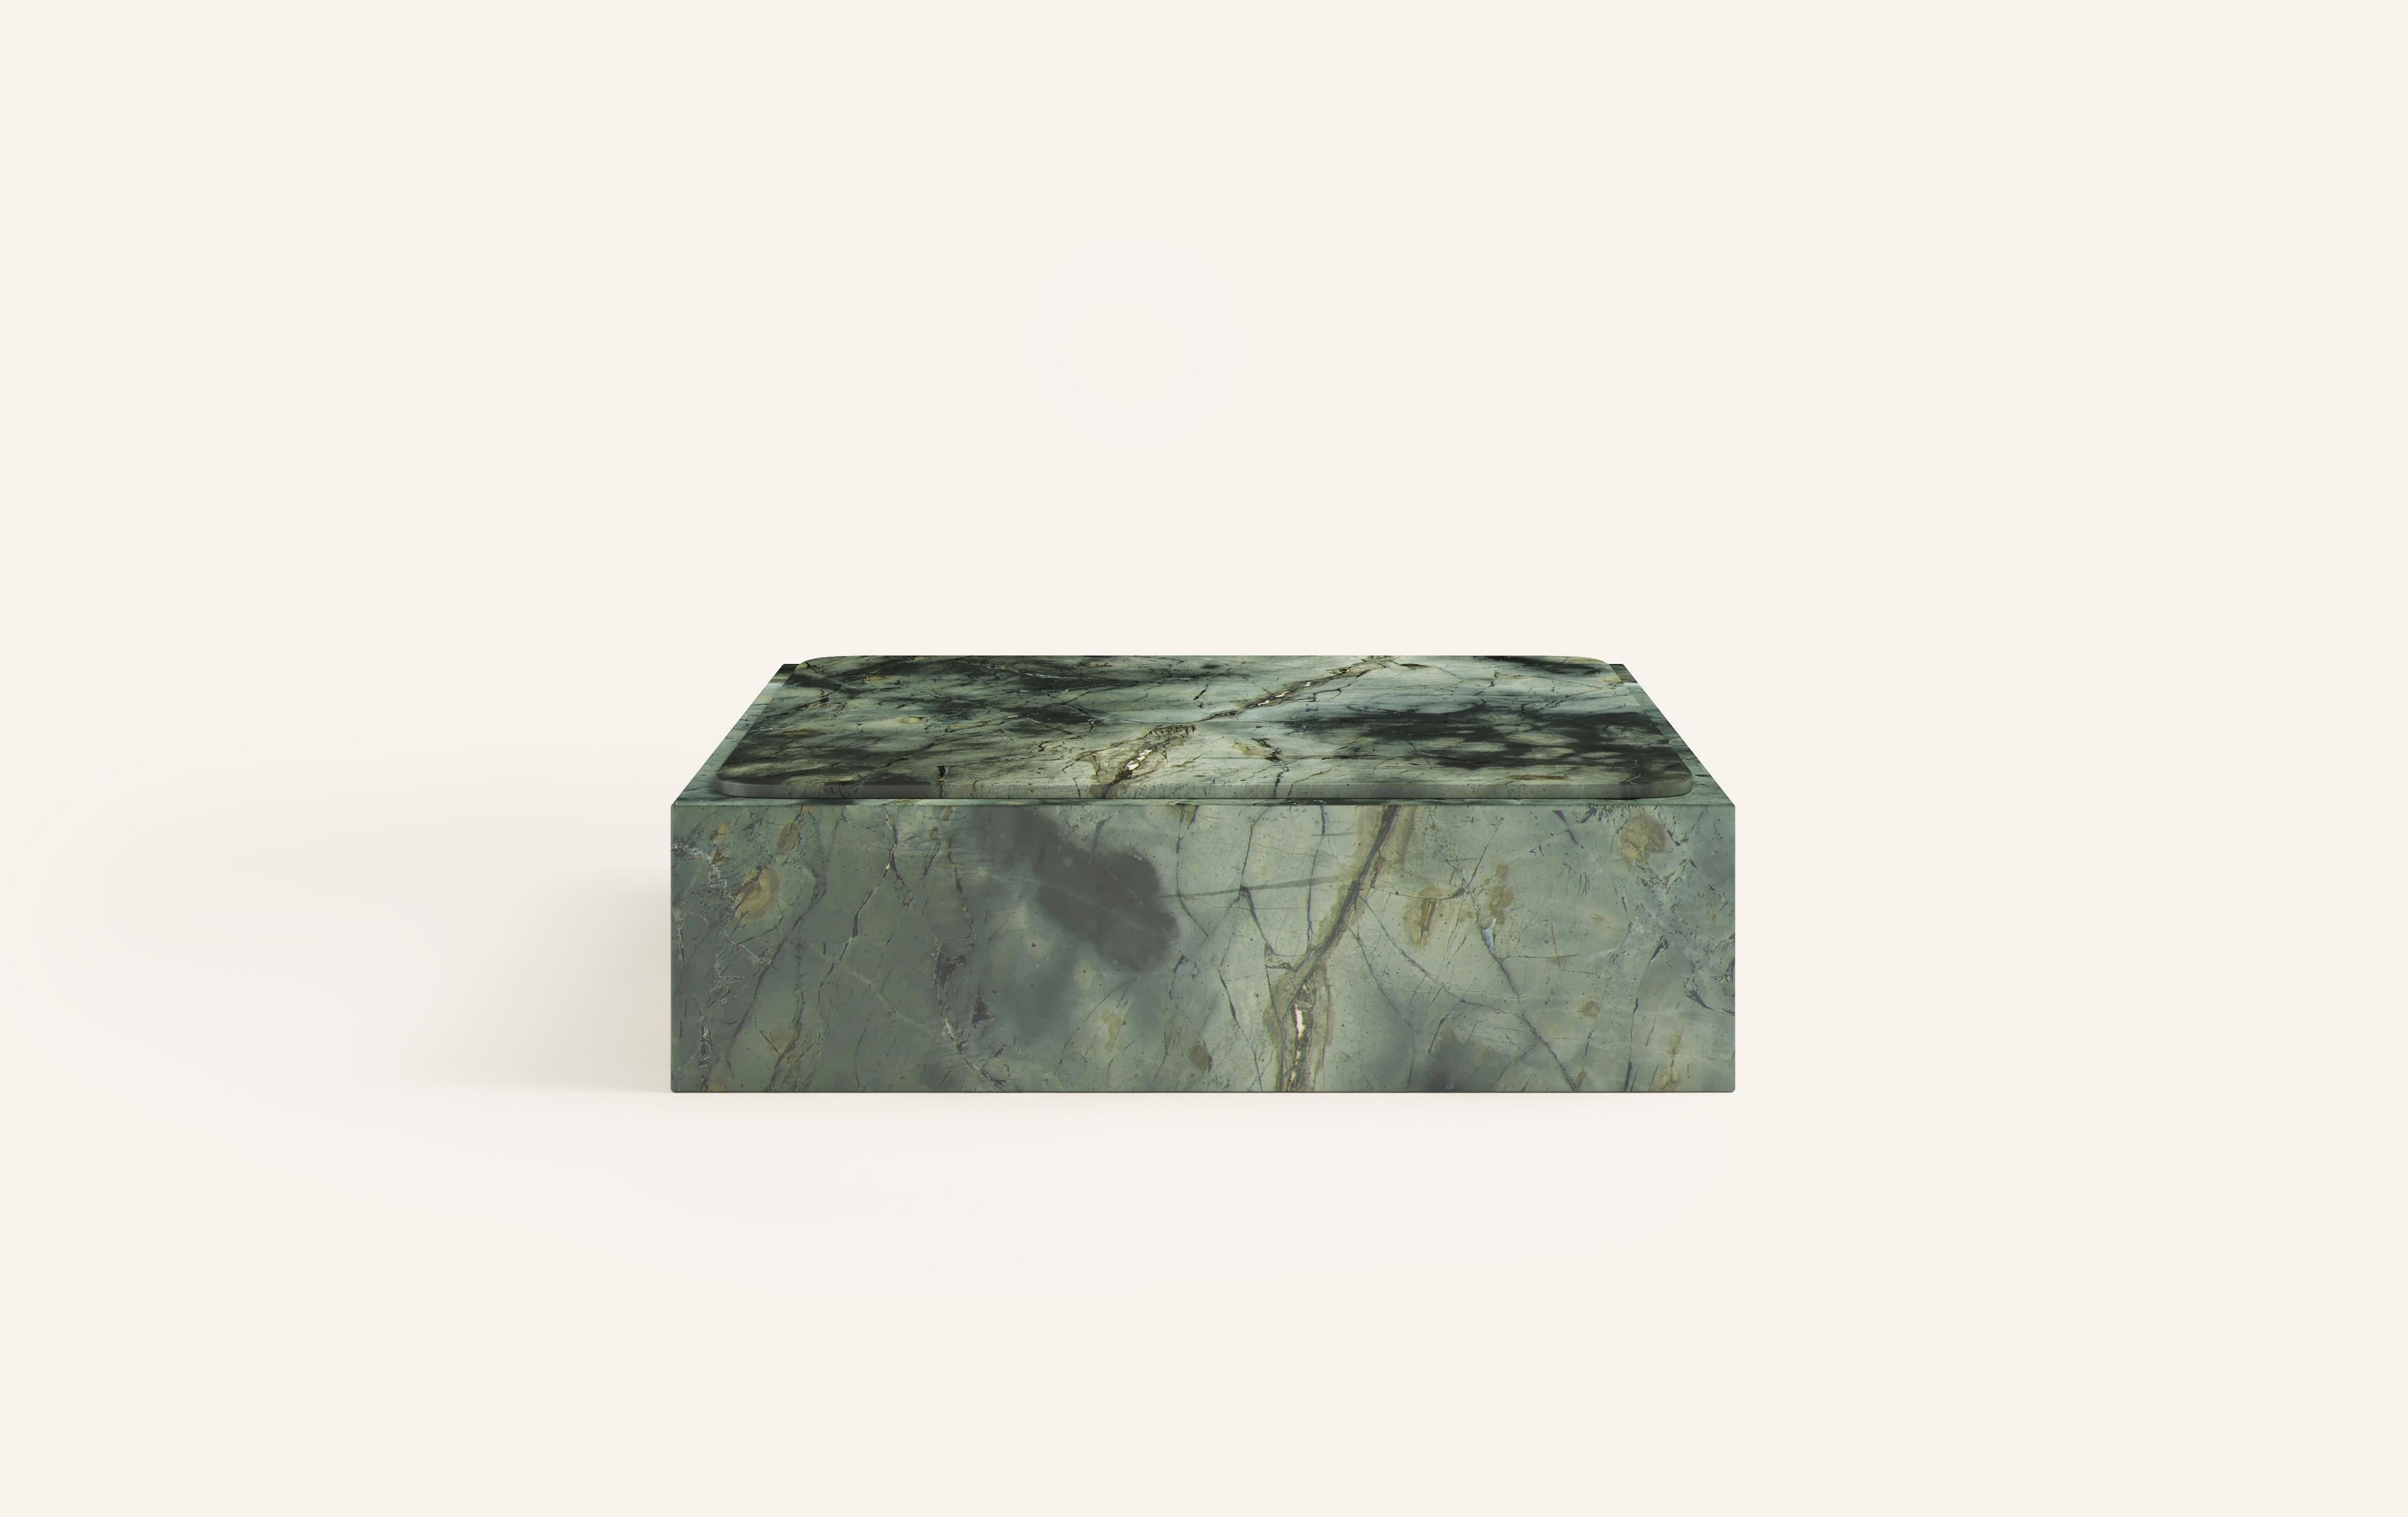 MONOLITHIC FORMS SOFTENED BY GENTLE EDGES. WITH ITS BOLD MARBLE PATTERNS CUBO IS AS VERSATILE AS IT IS STRIKING.

DIMENSIONS:
48”L x 48”W x 13”H: 
- 3/4